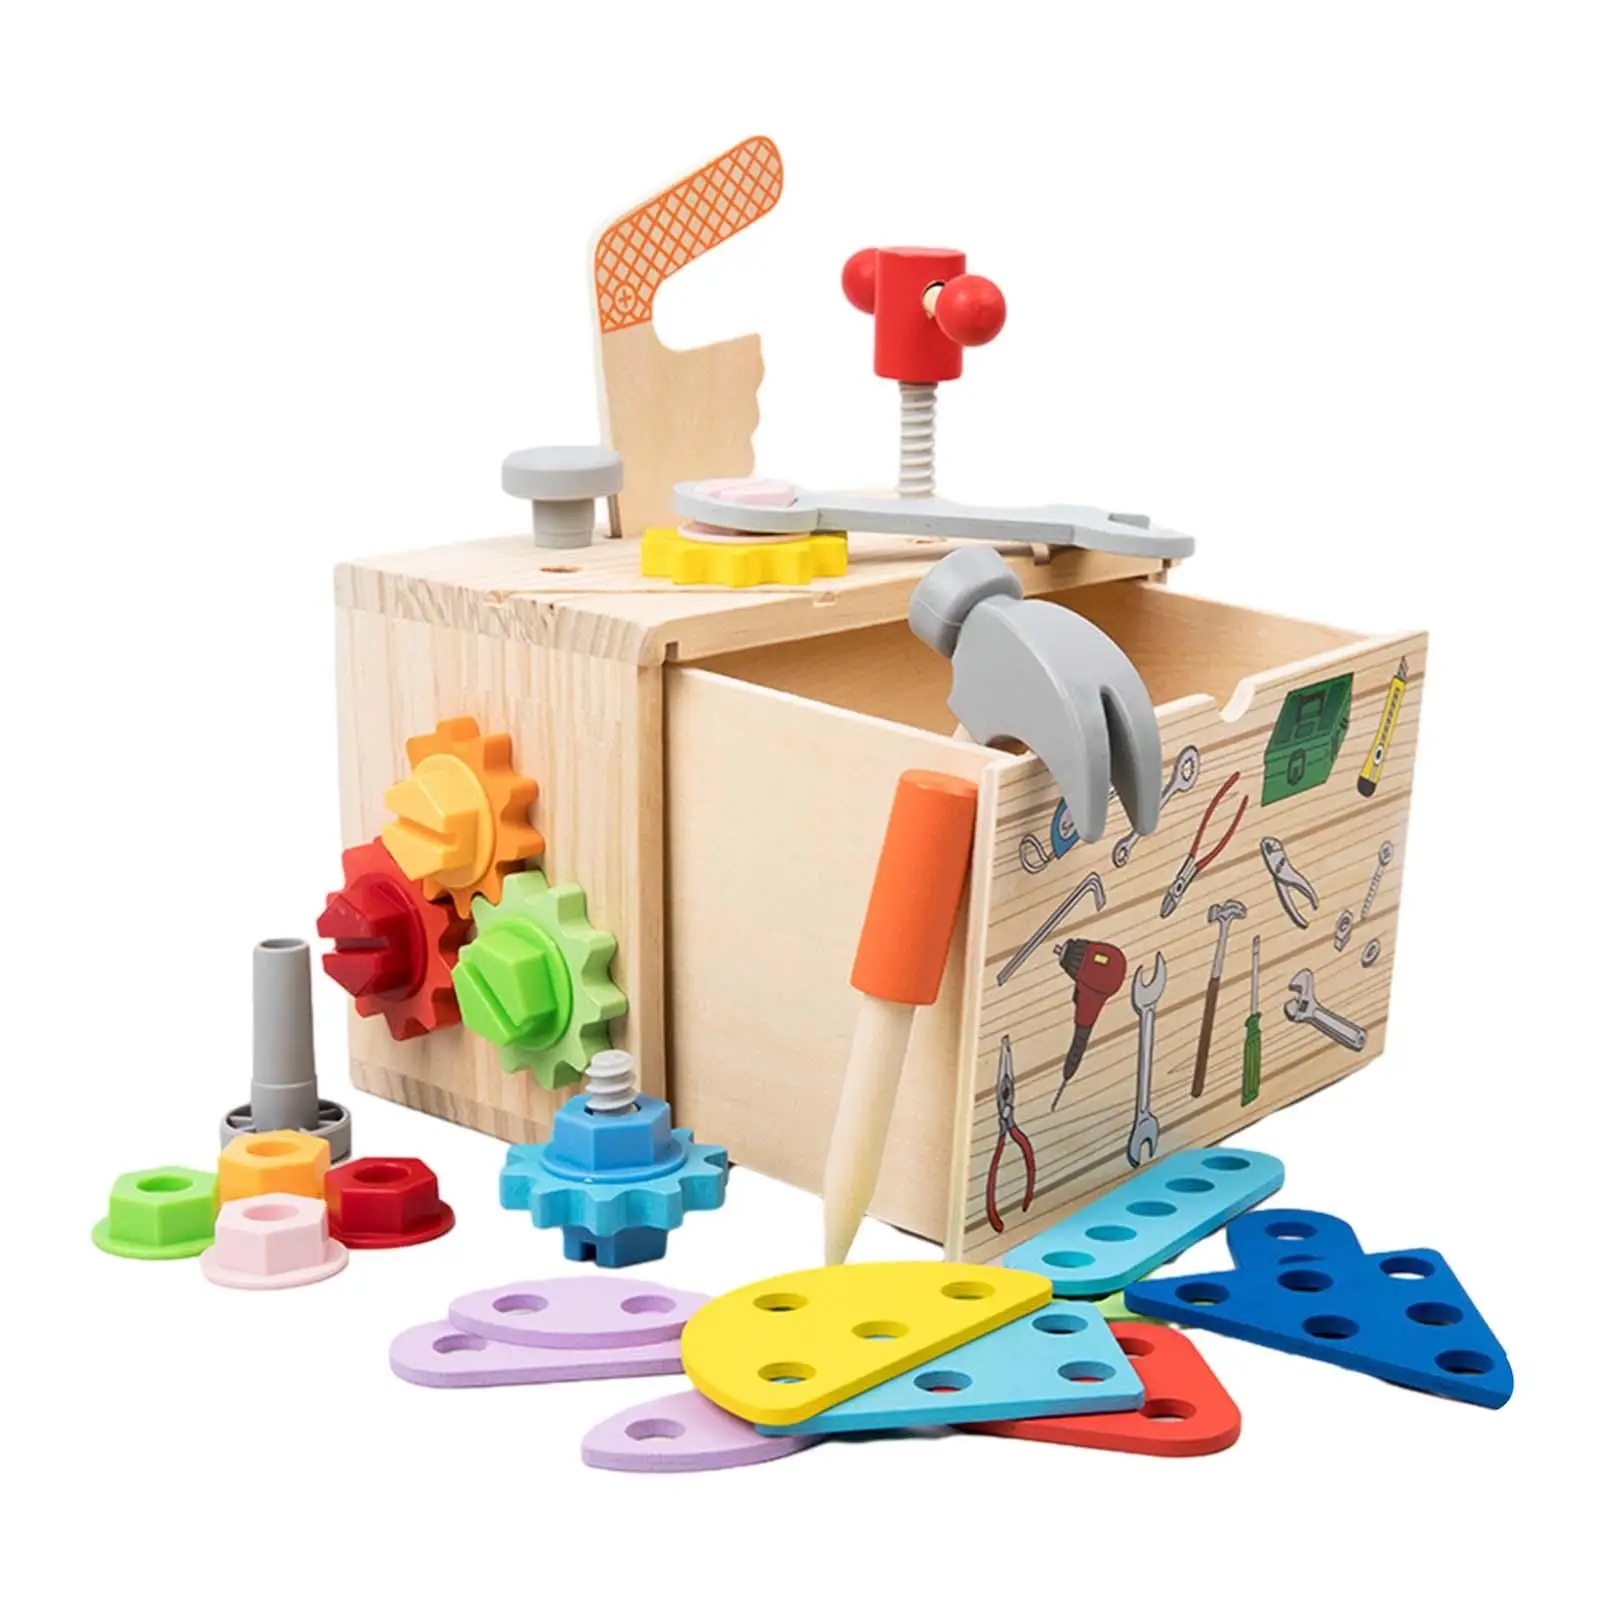 Wooden Toolbox Toy Creative Drawer Type Durable Kids Play Tool Set for Girls Boys Birthday 2 3 4 5 Years Old Toddlers Festivals